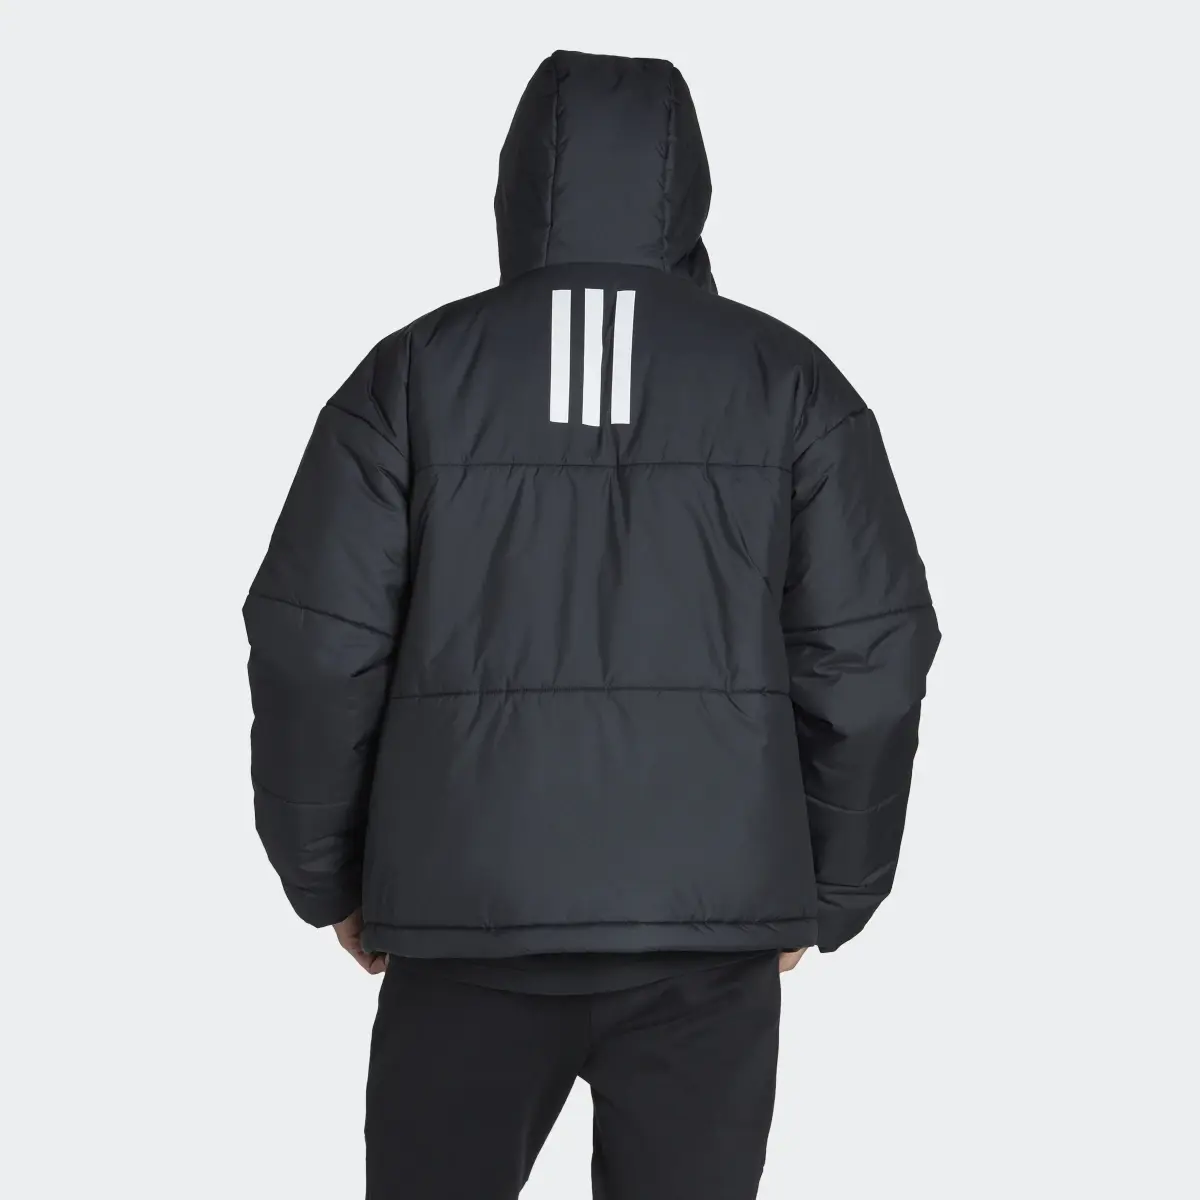 Adidas BSC 3-Stripes Puffy Hooded Jacket. 3